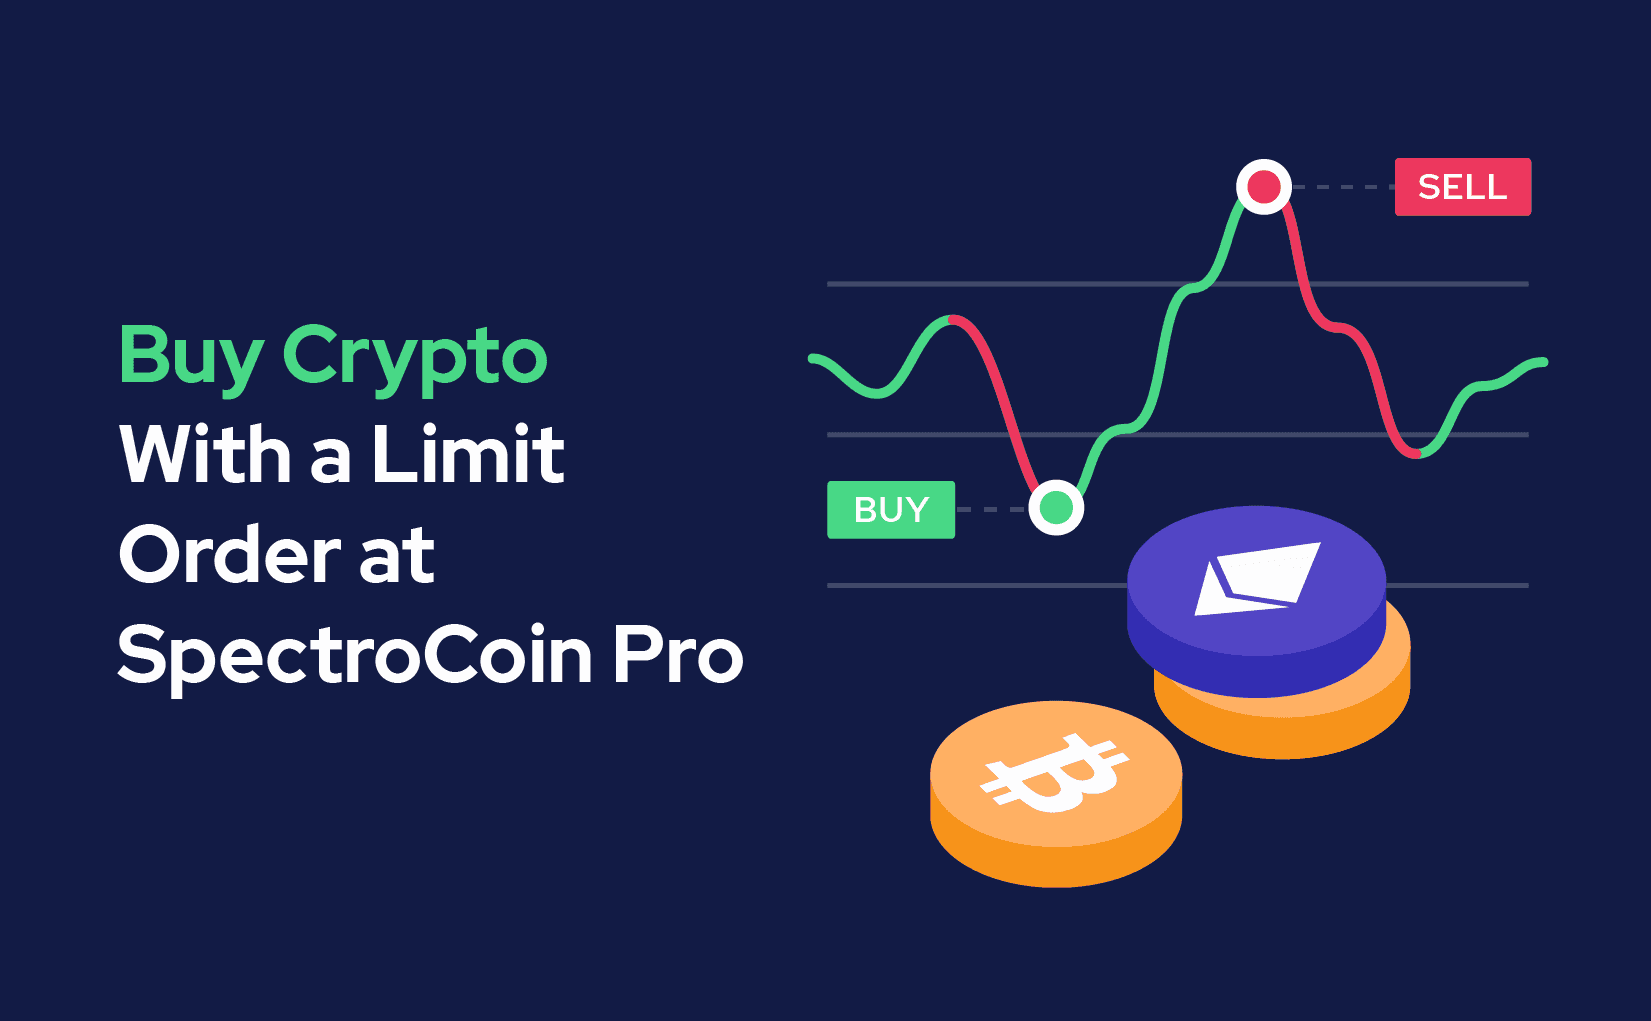 In this blog post, we present how to buy Bitcoin with a limit order at SpectroCoin Pro.